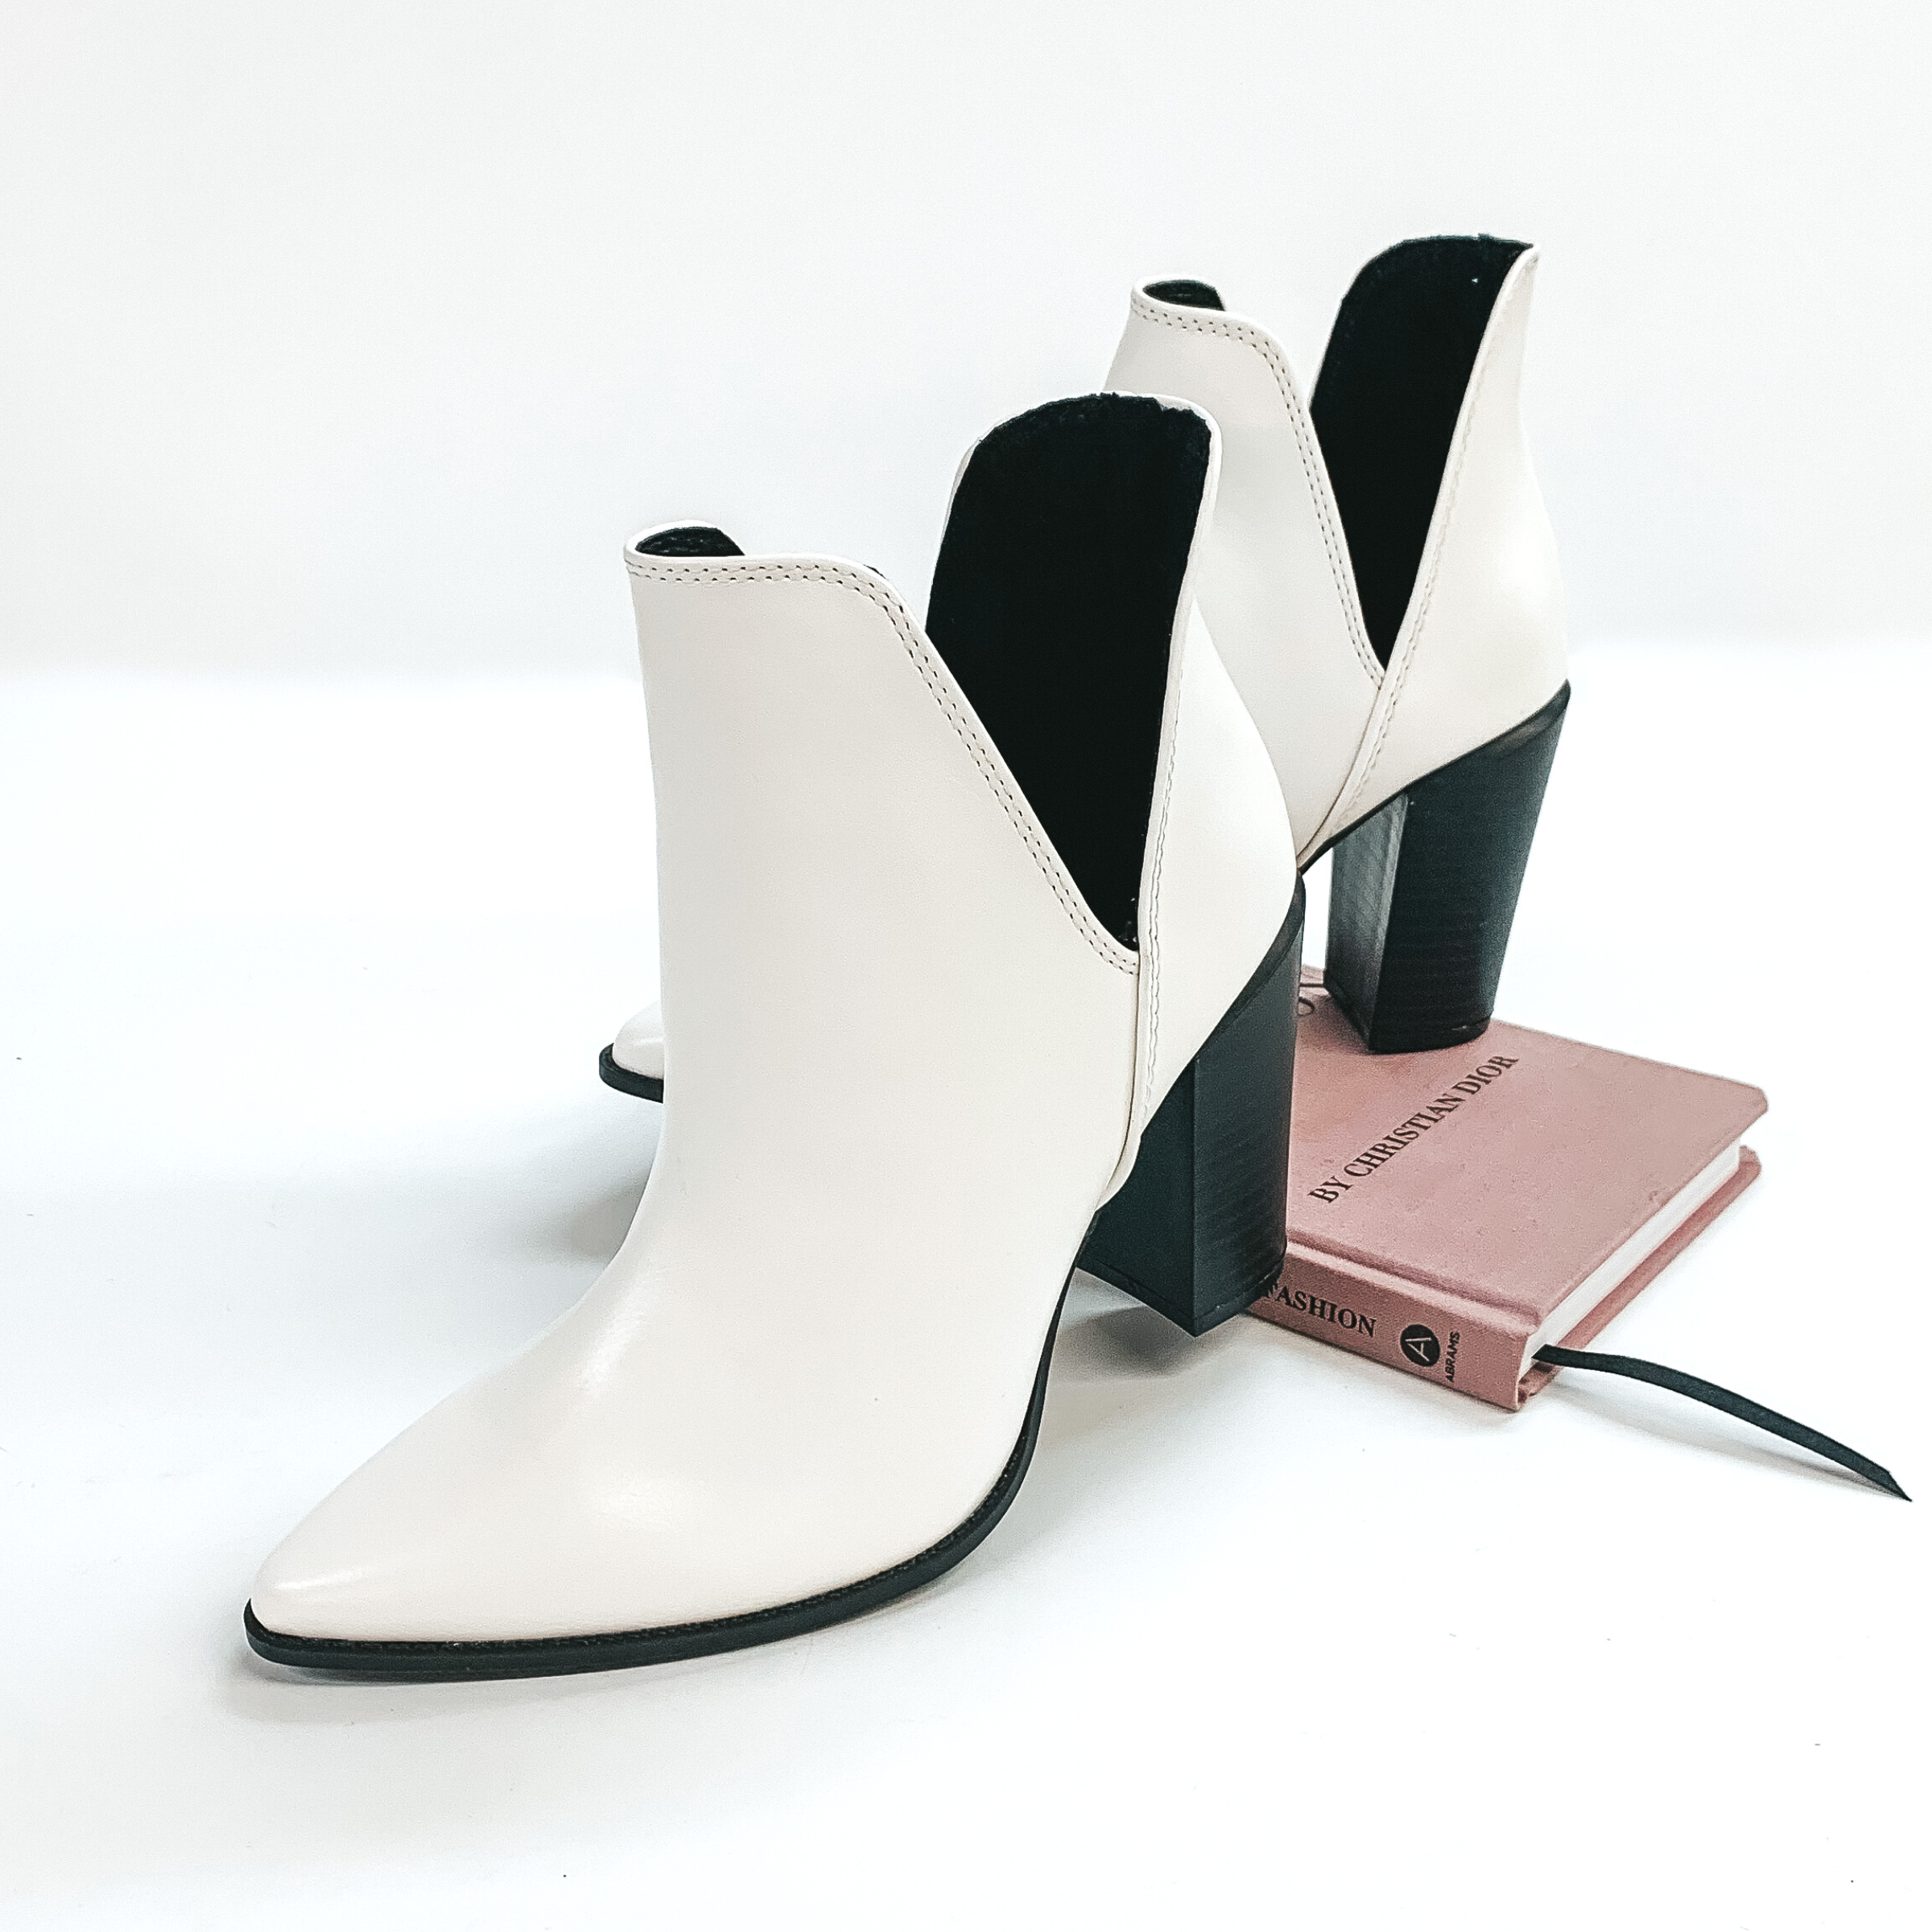 Ankle booties in white with a black wooden heel. These booties are pictured on a white background standing on a book. 